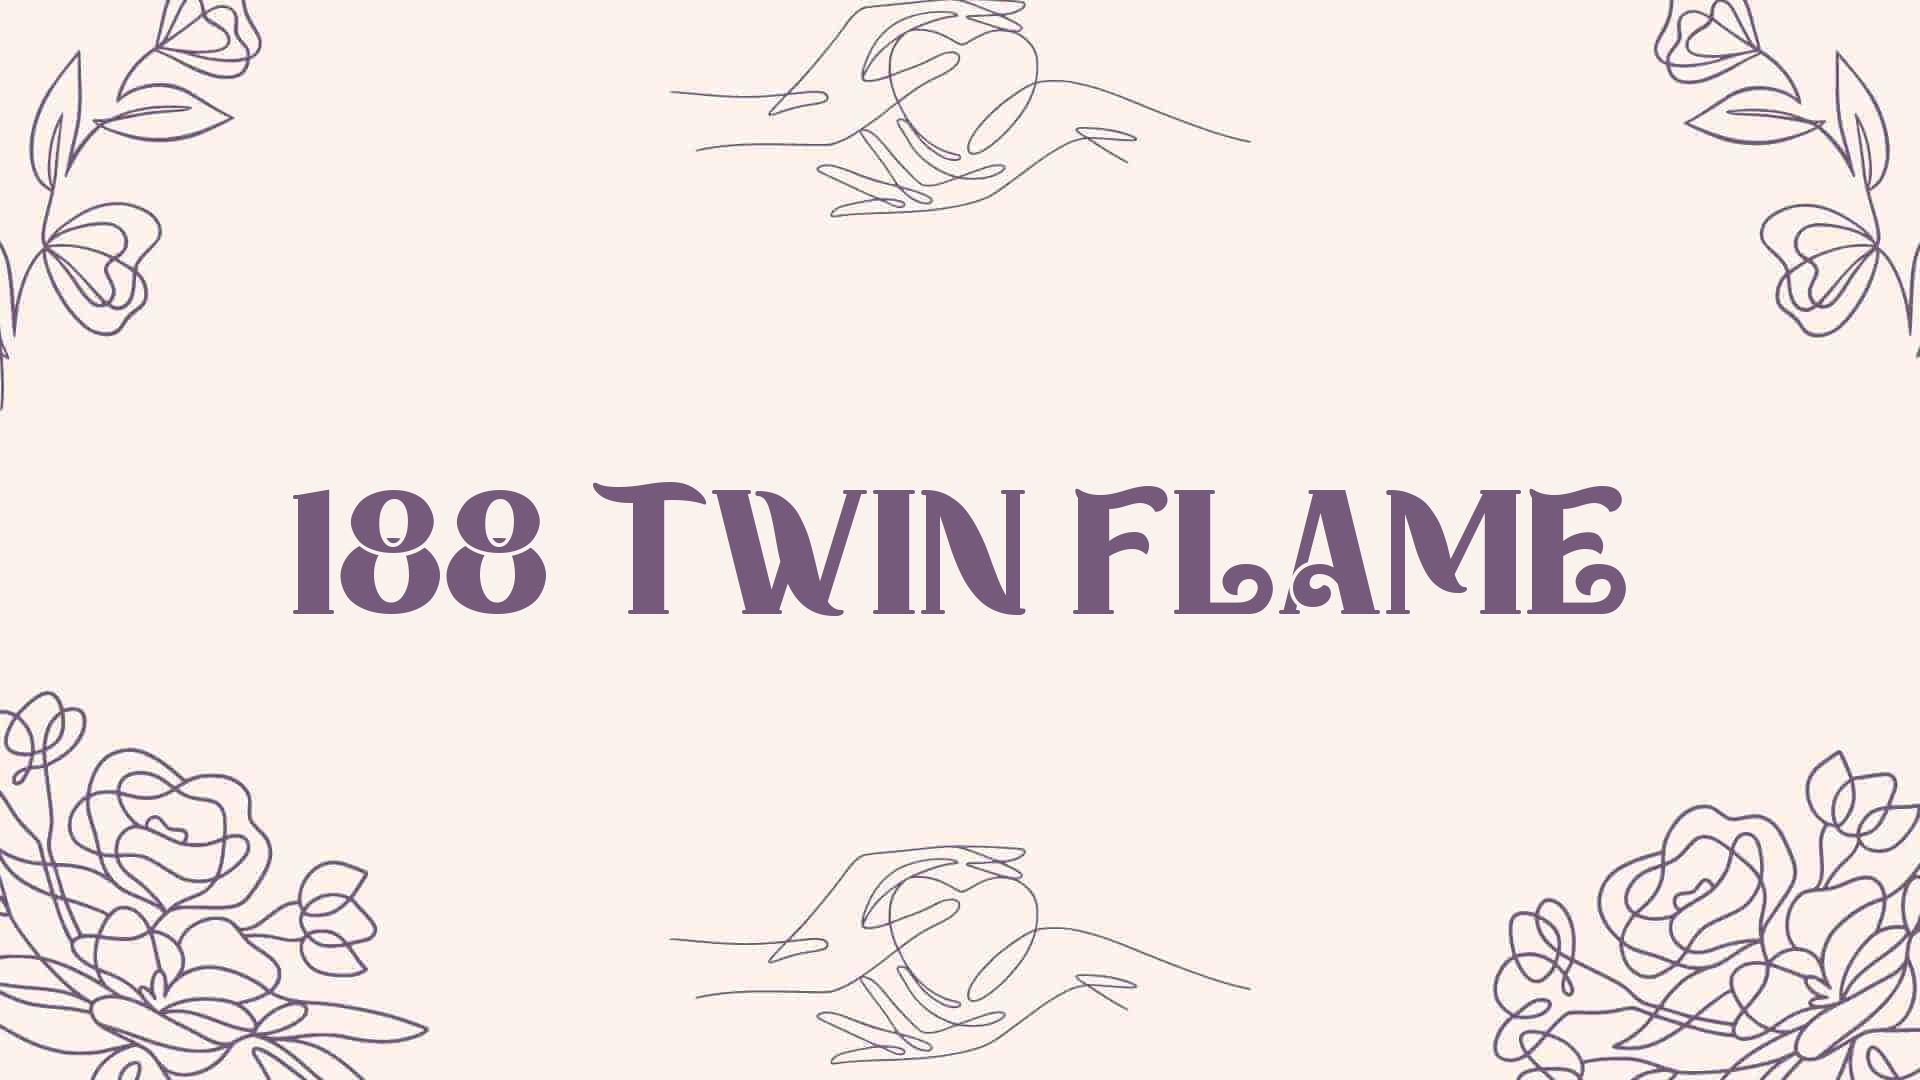 188 twin flame [ Meaning Revealed ]